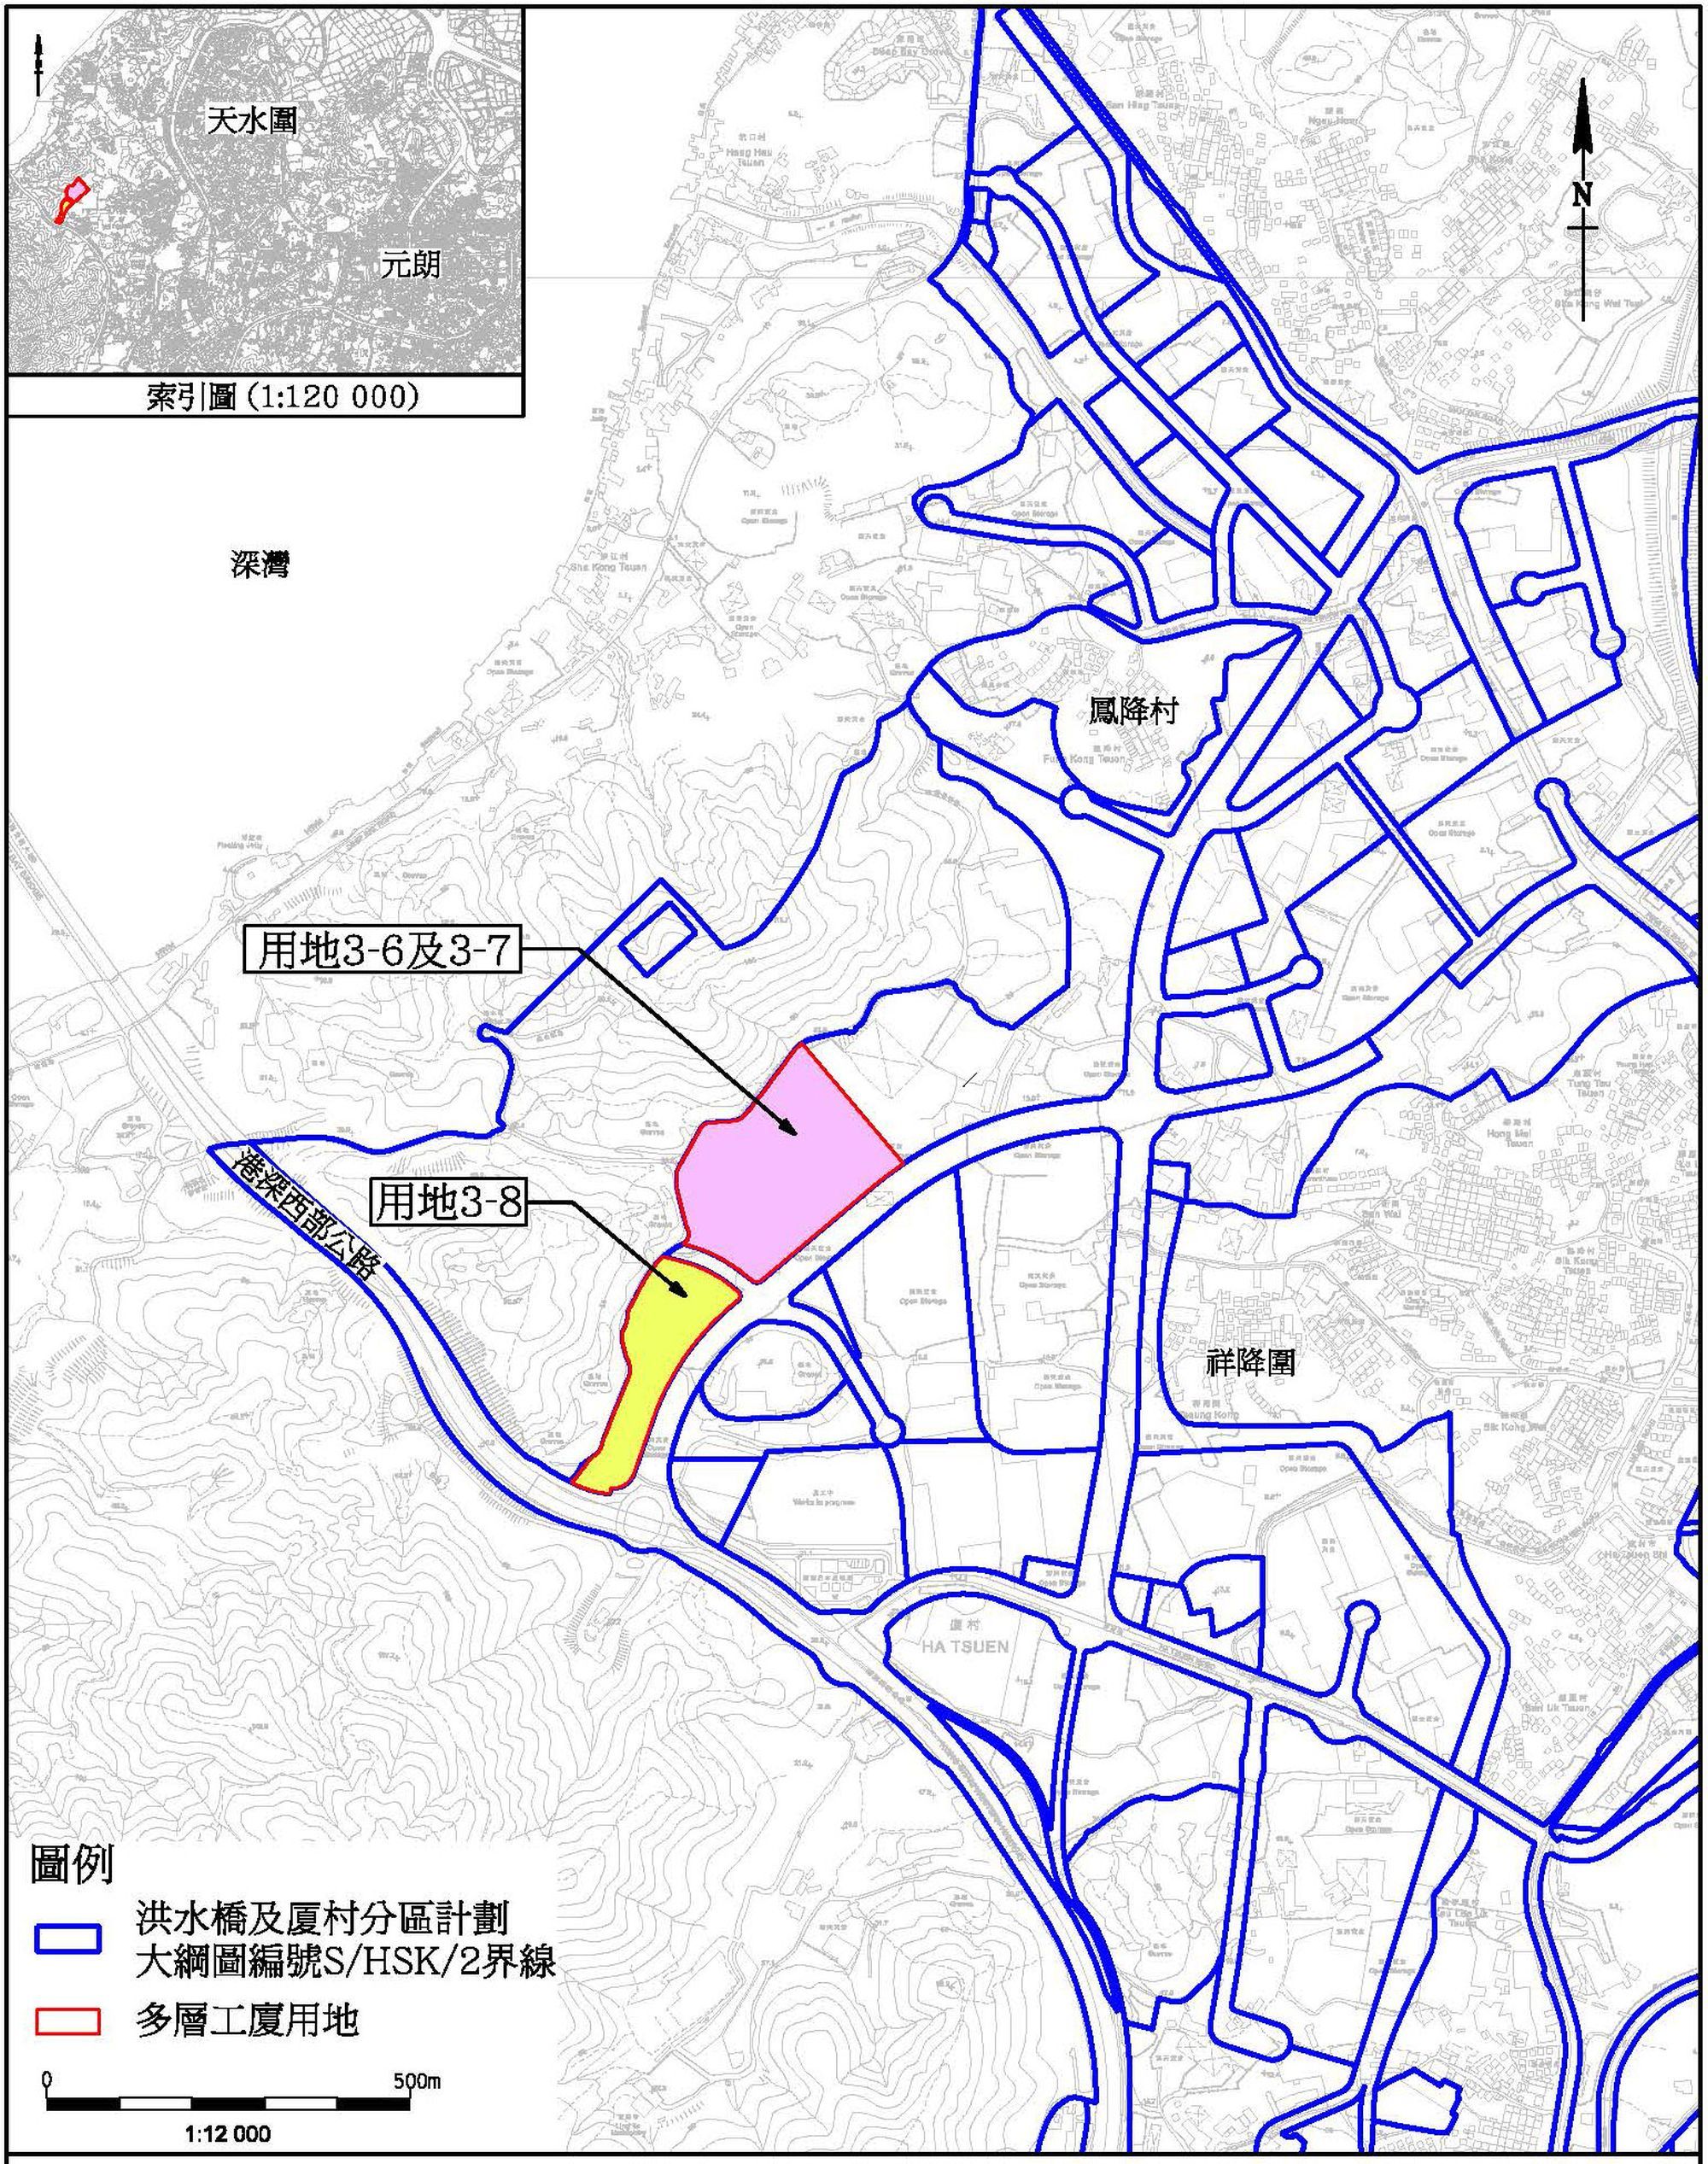 Of the first batch of MSB sites for modern industries to be made available, two sites are situated in Hung Shui Kiu/Ha Tsuen New Development Area (HSK/HT NDA). Pictured is the proposed MSB sites for modern industries in HSK/HT NDA.